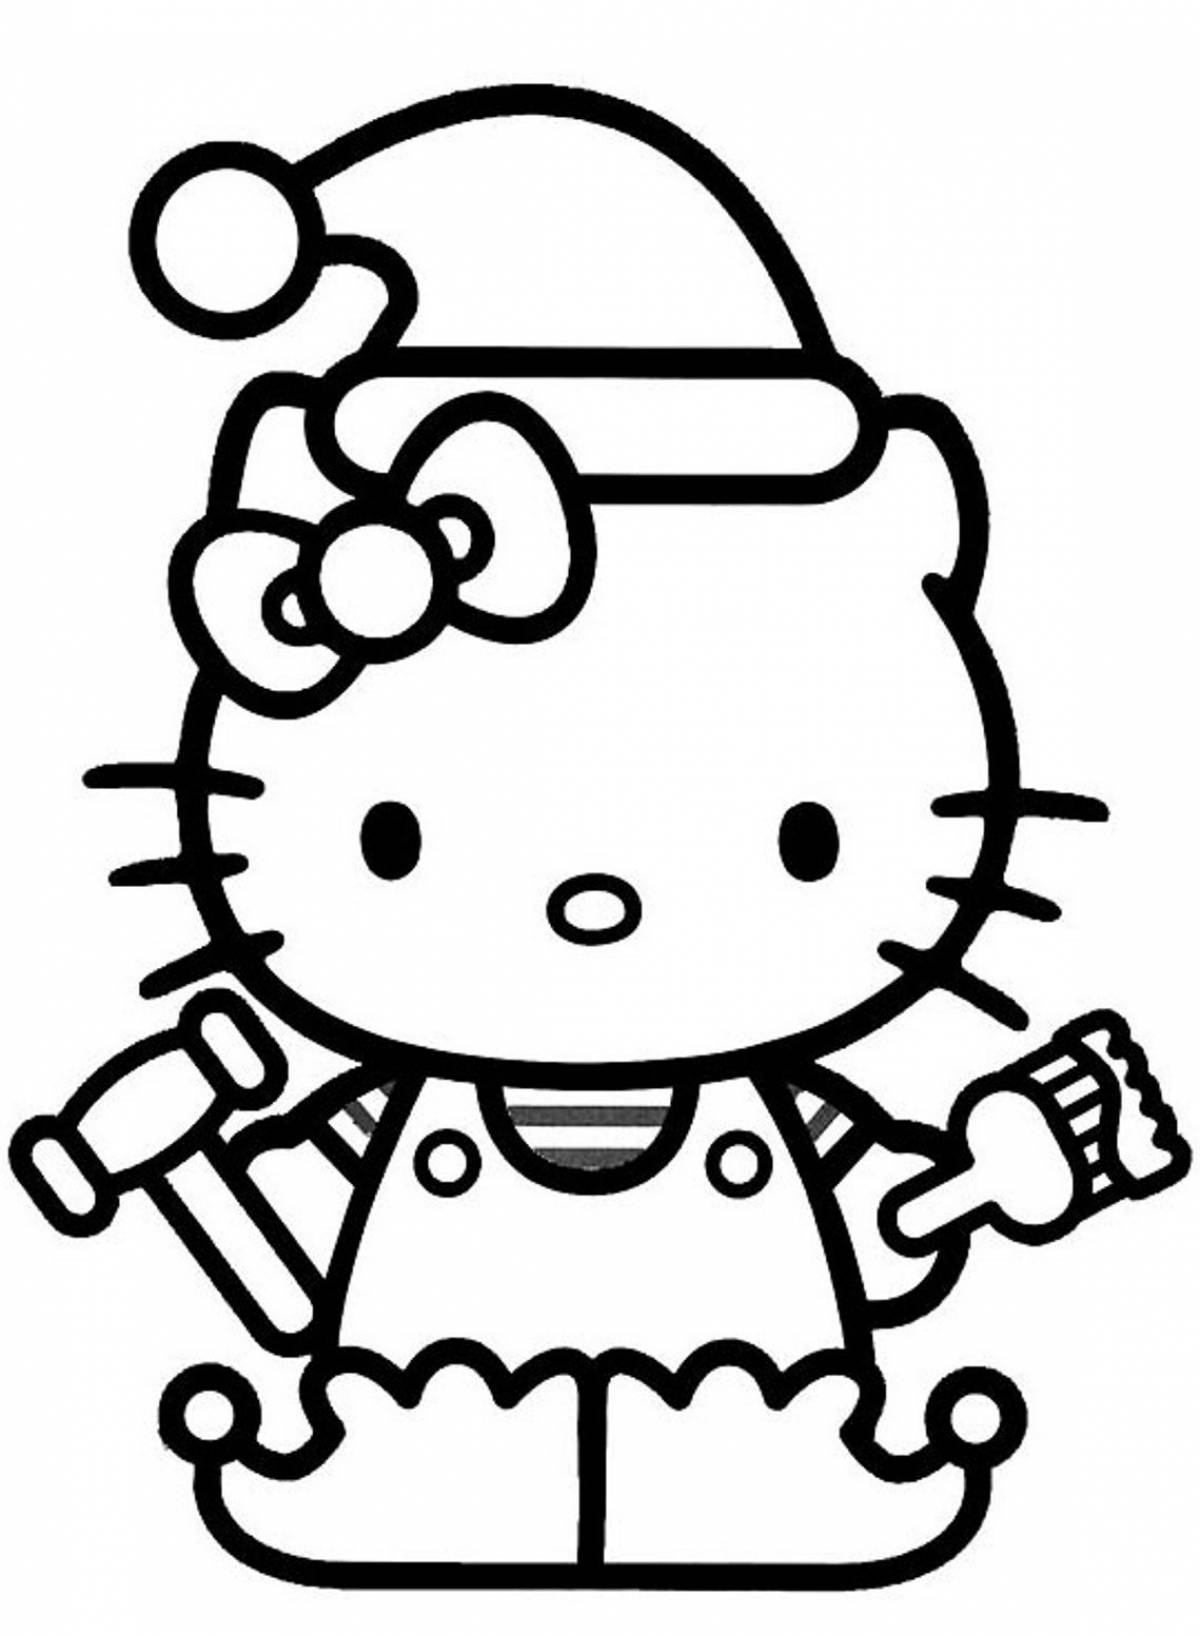 Awesome hello kitty face coloring page